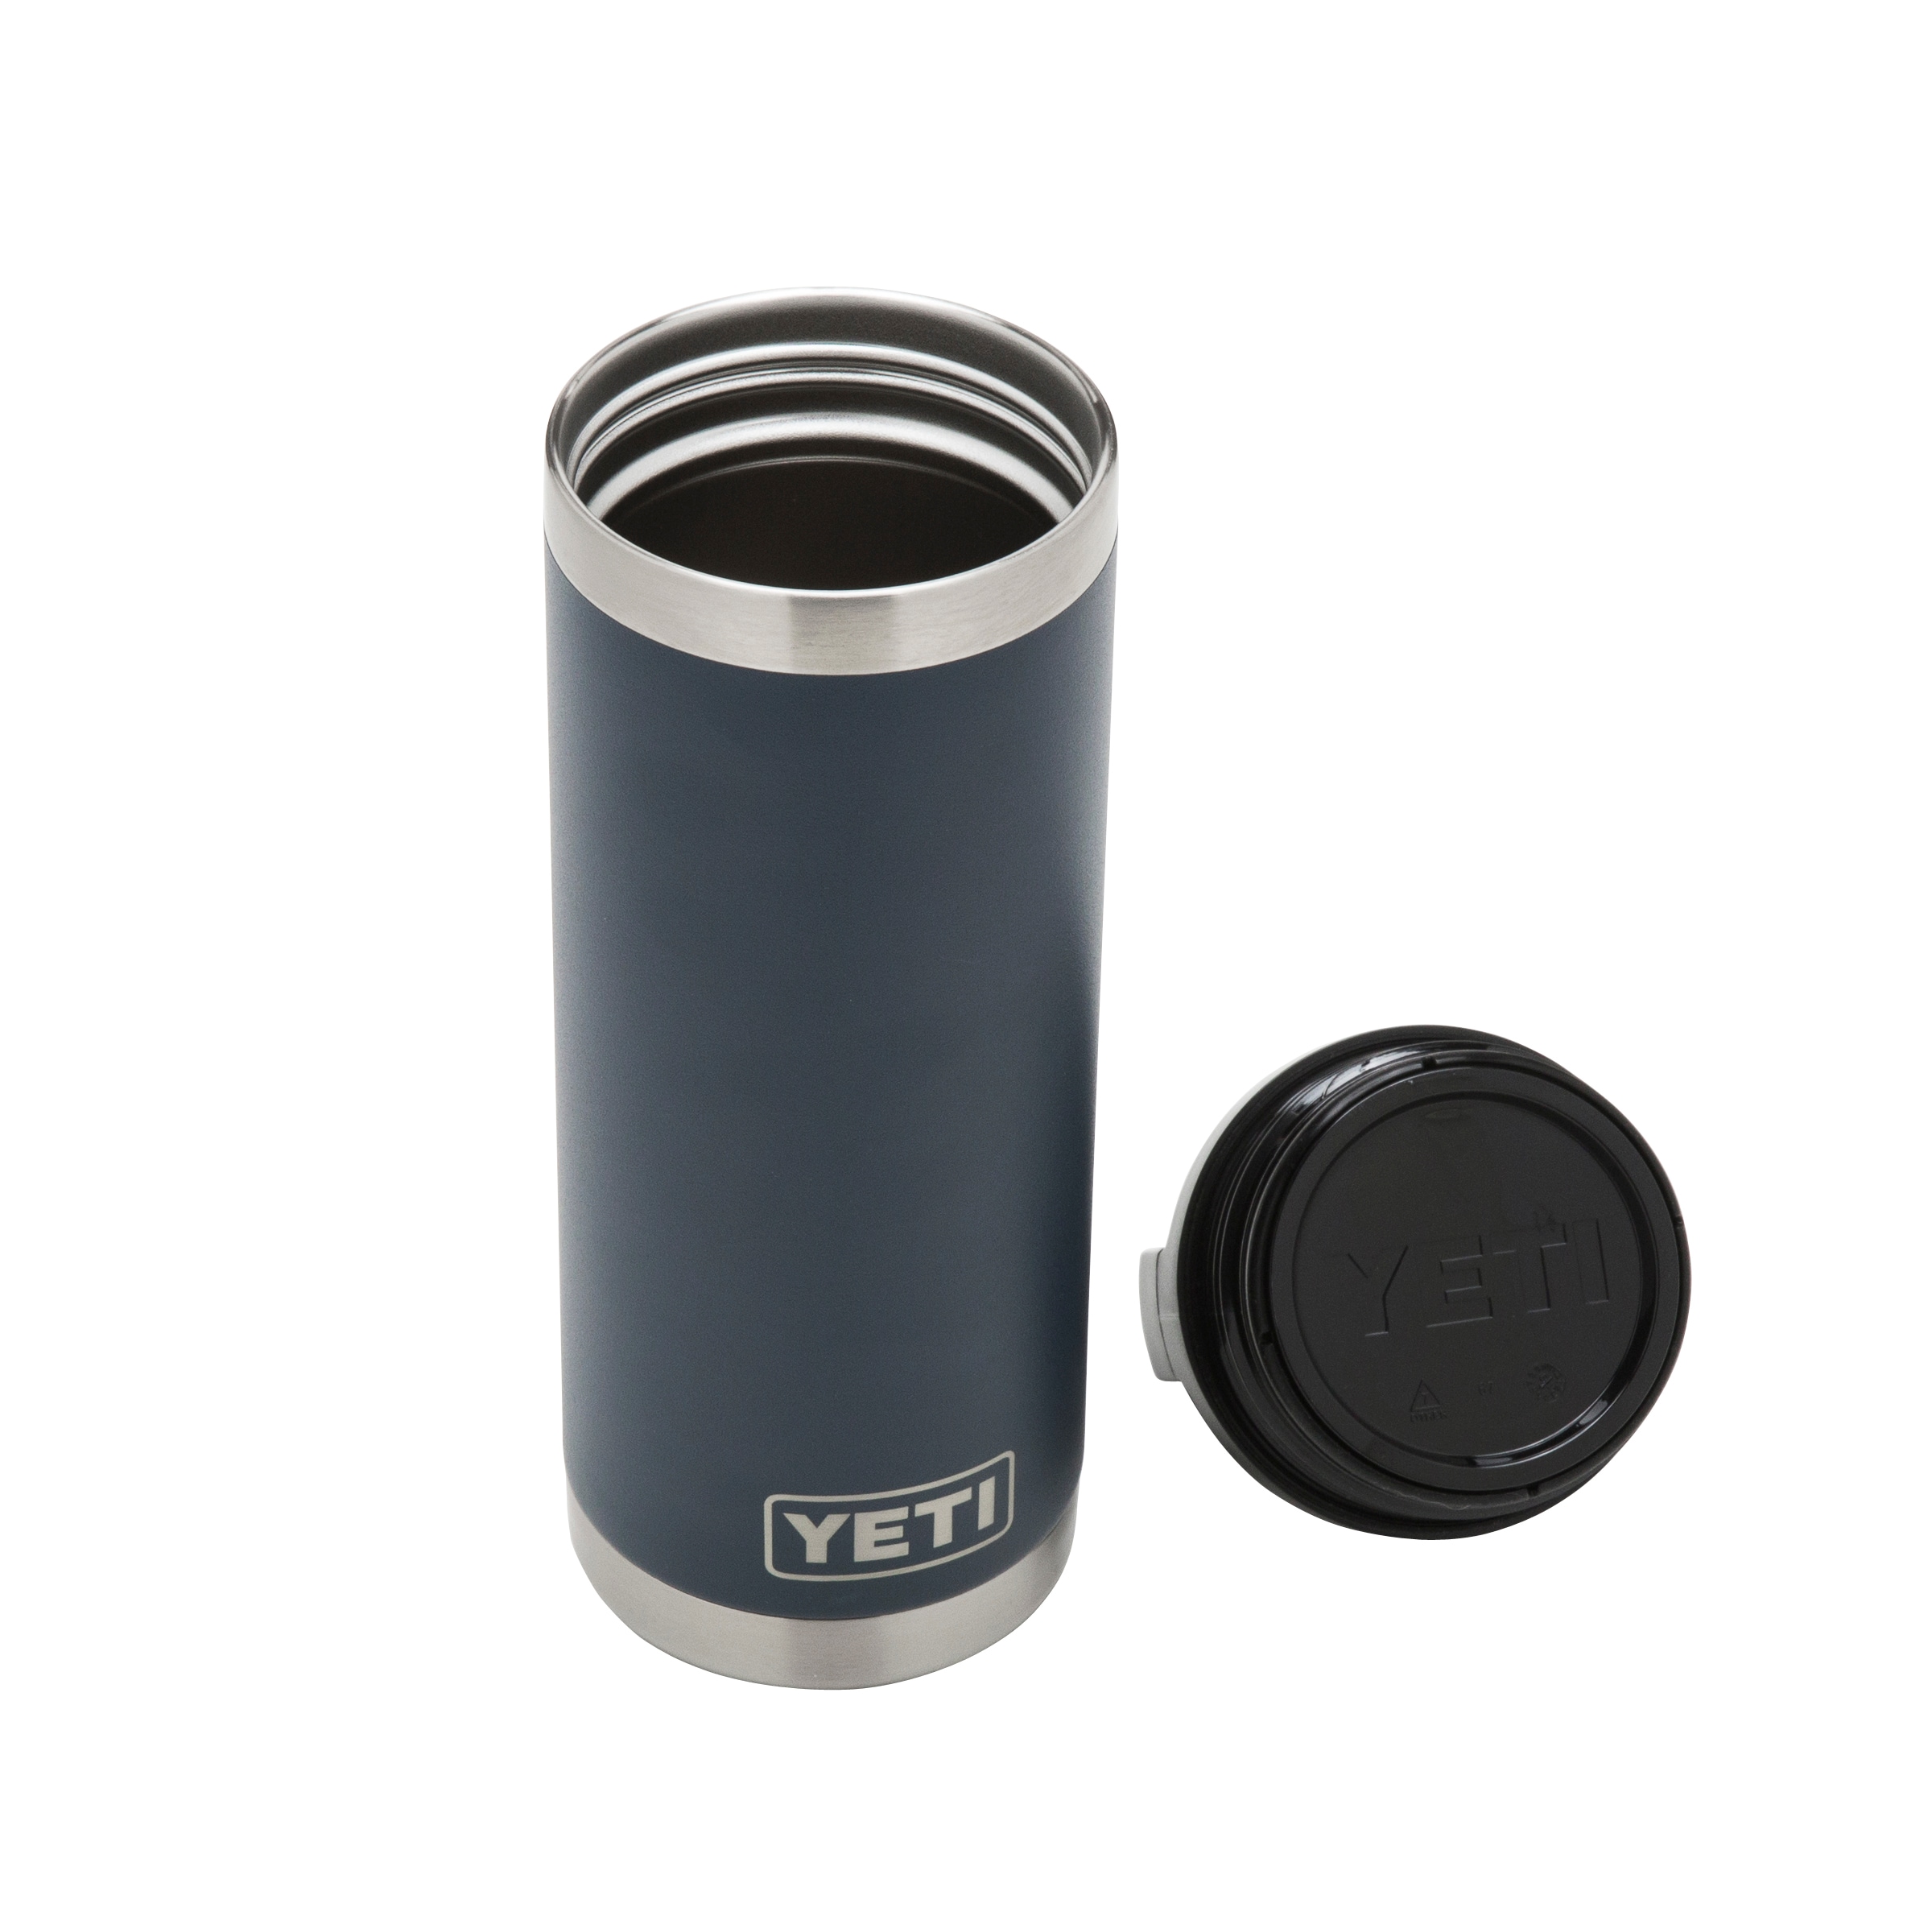 YETI Rambler 18-fl oz Stainless Steel Water Bottle at Lowes.com